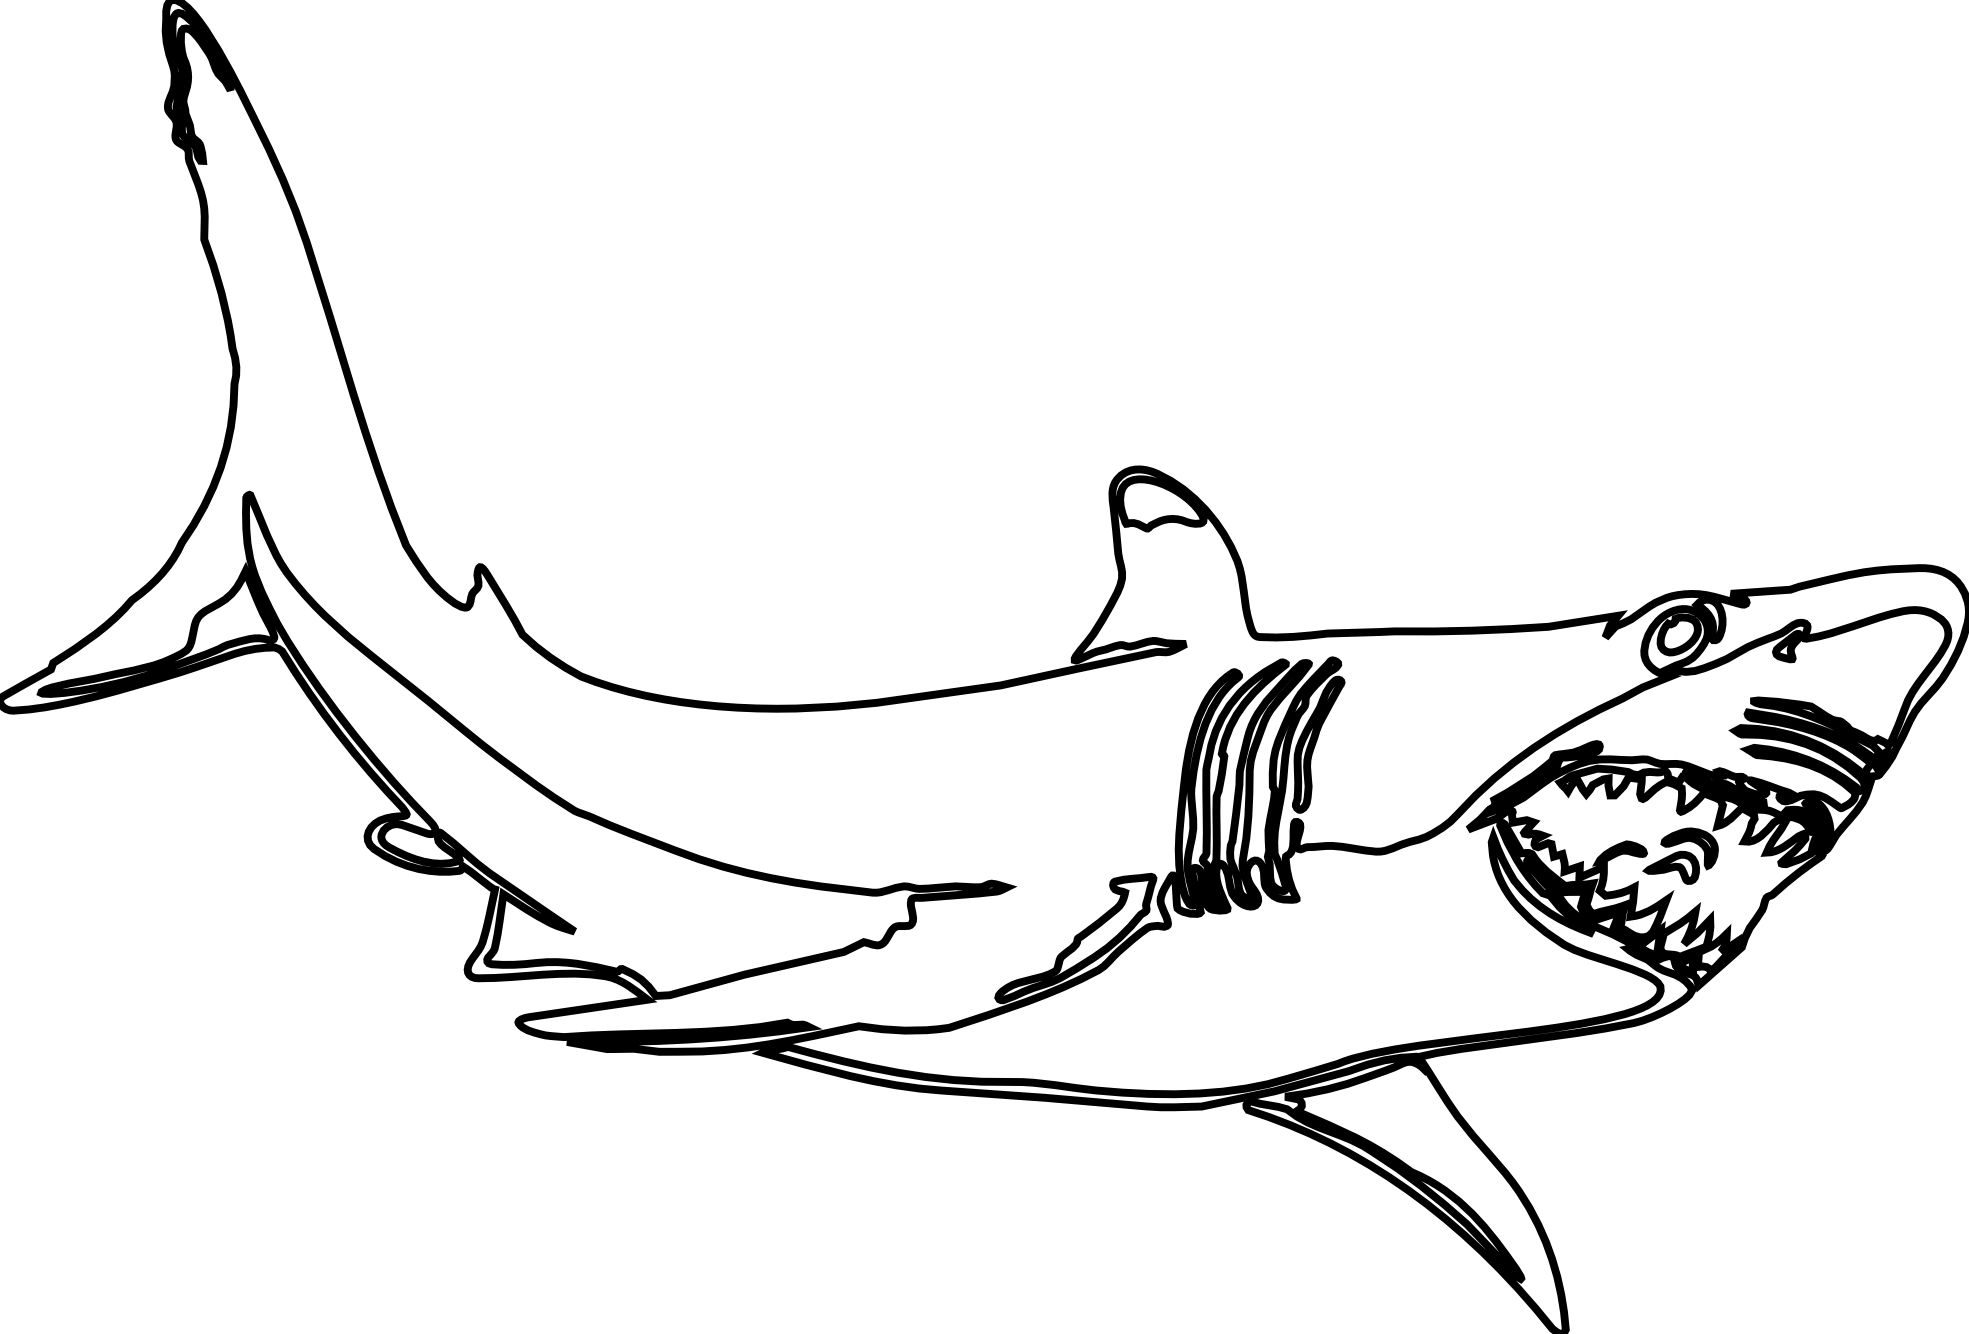 Clipart free shark.  collection of black